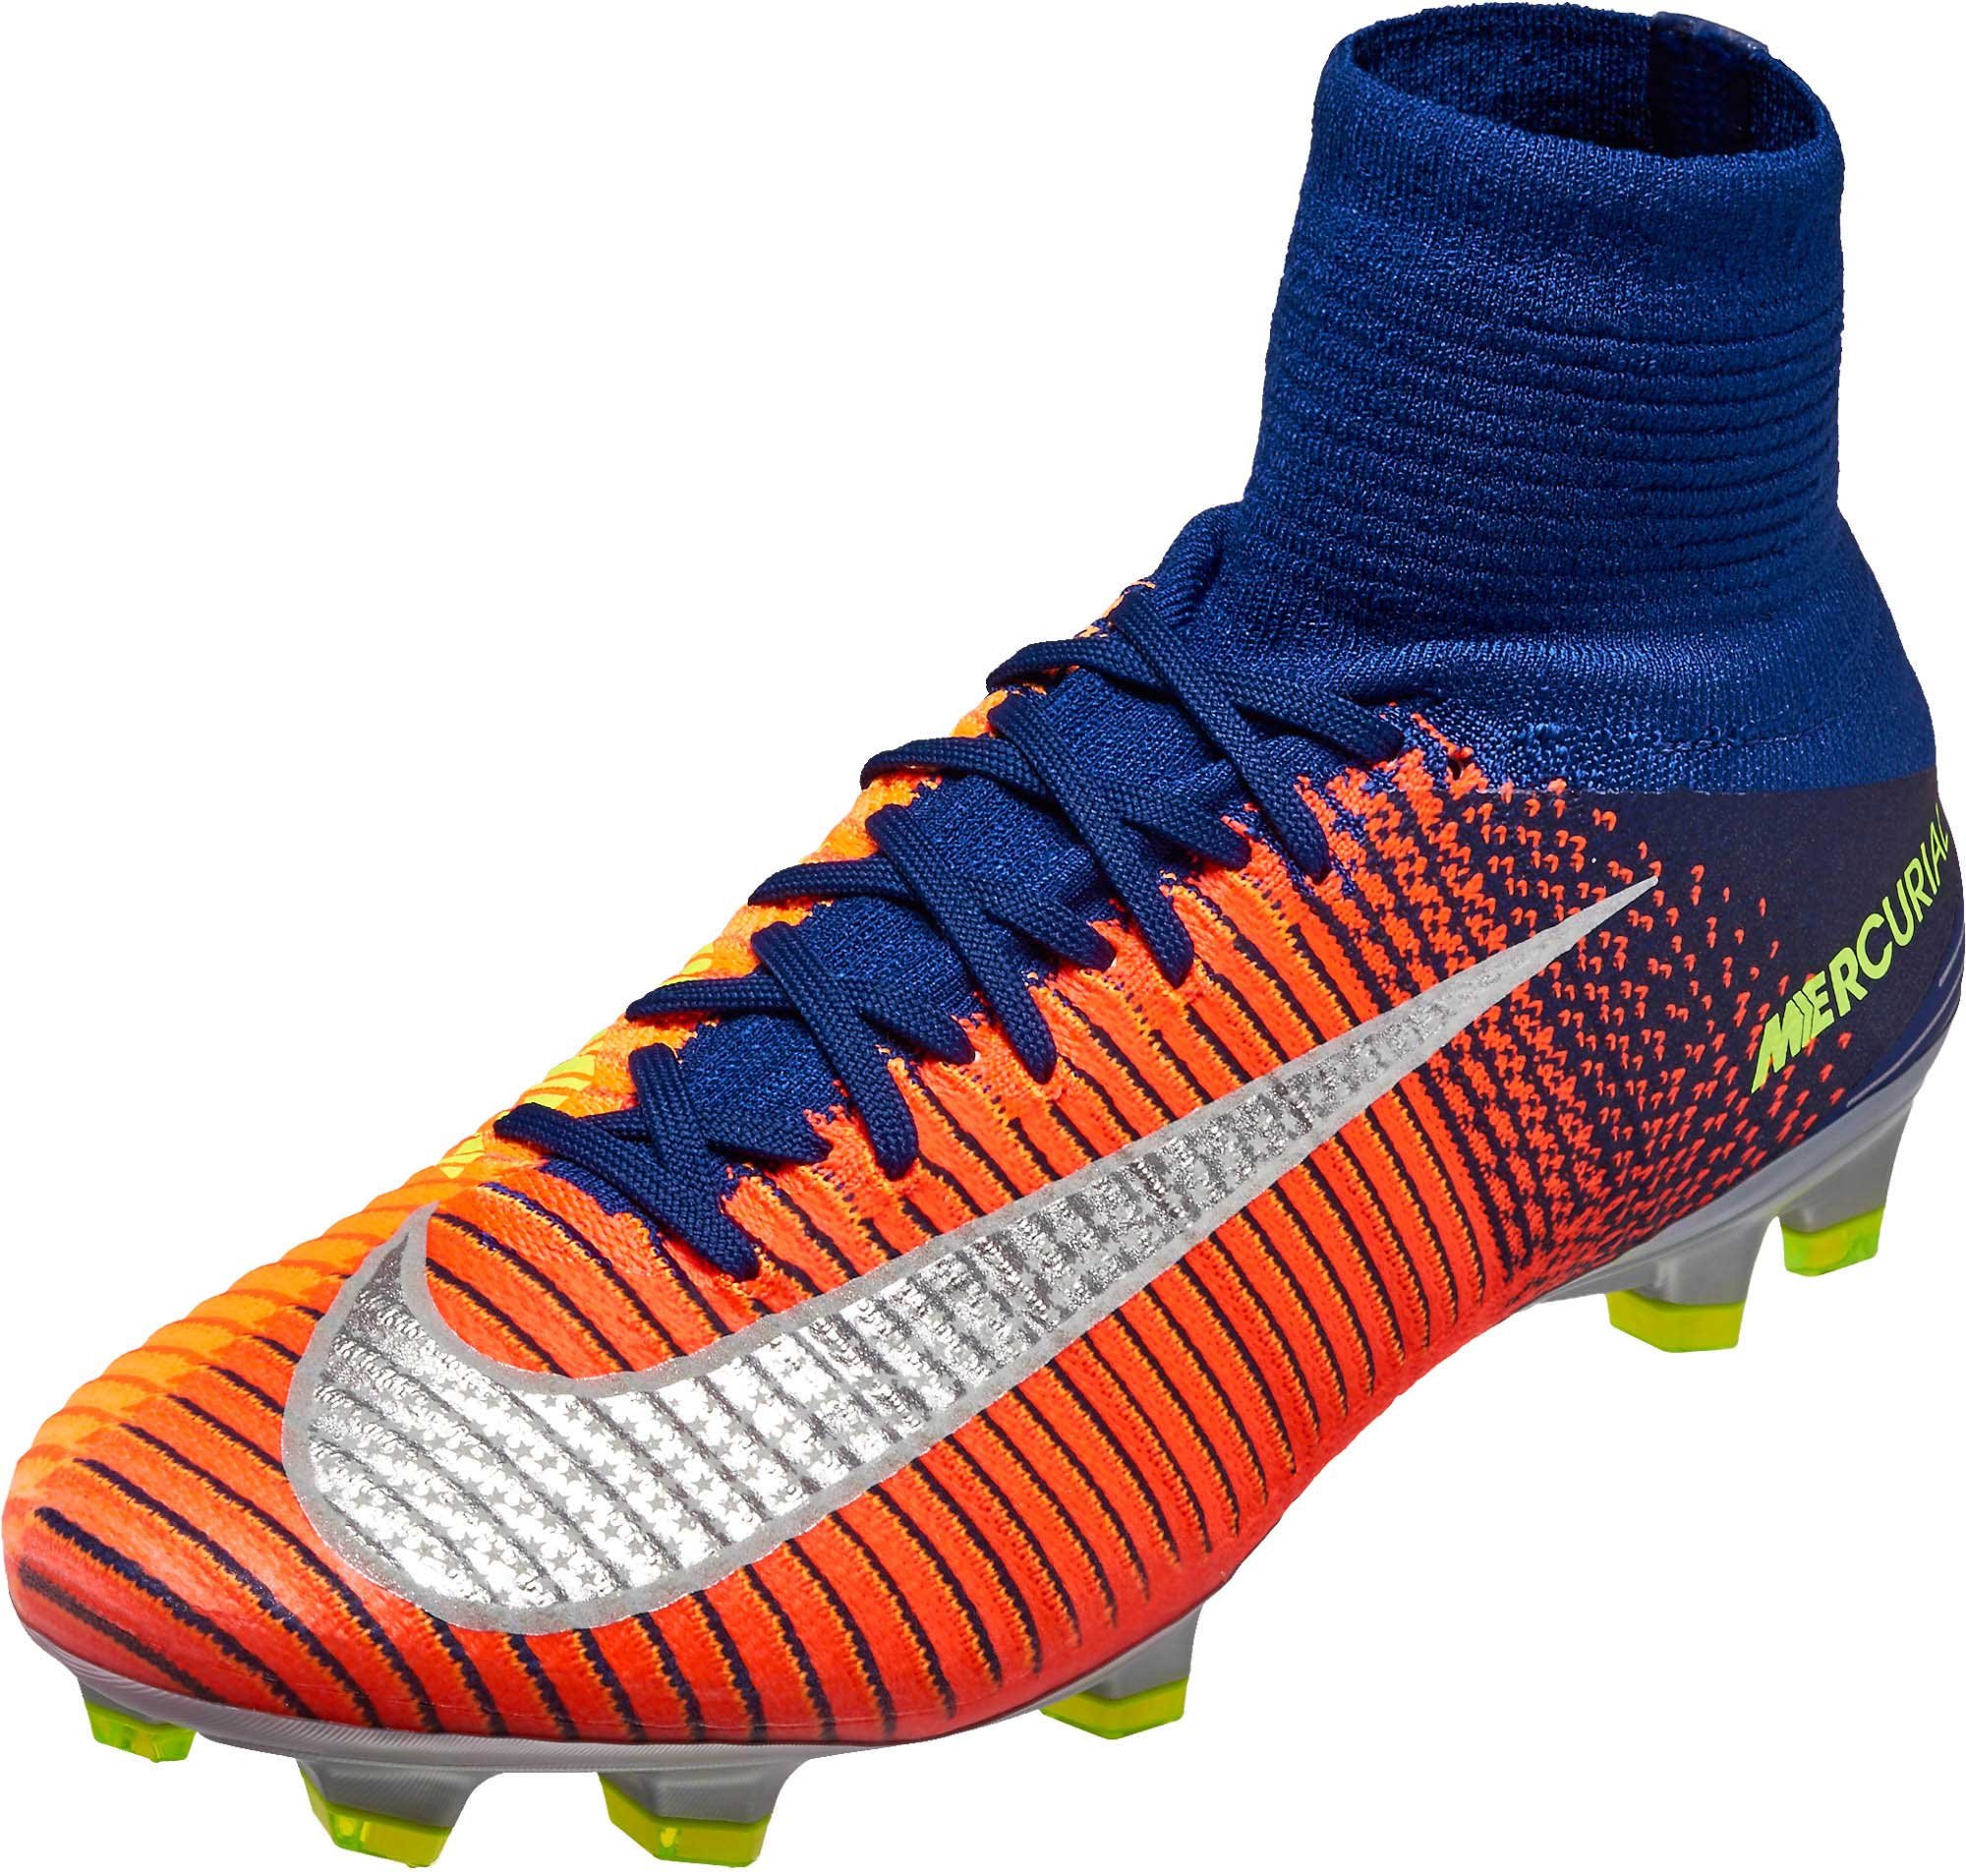 Nike Mercurial Superfly V FG Cleats